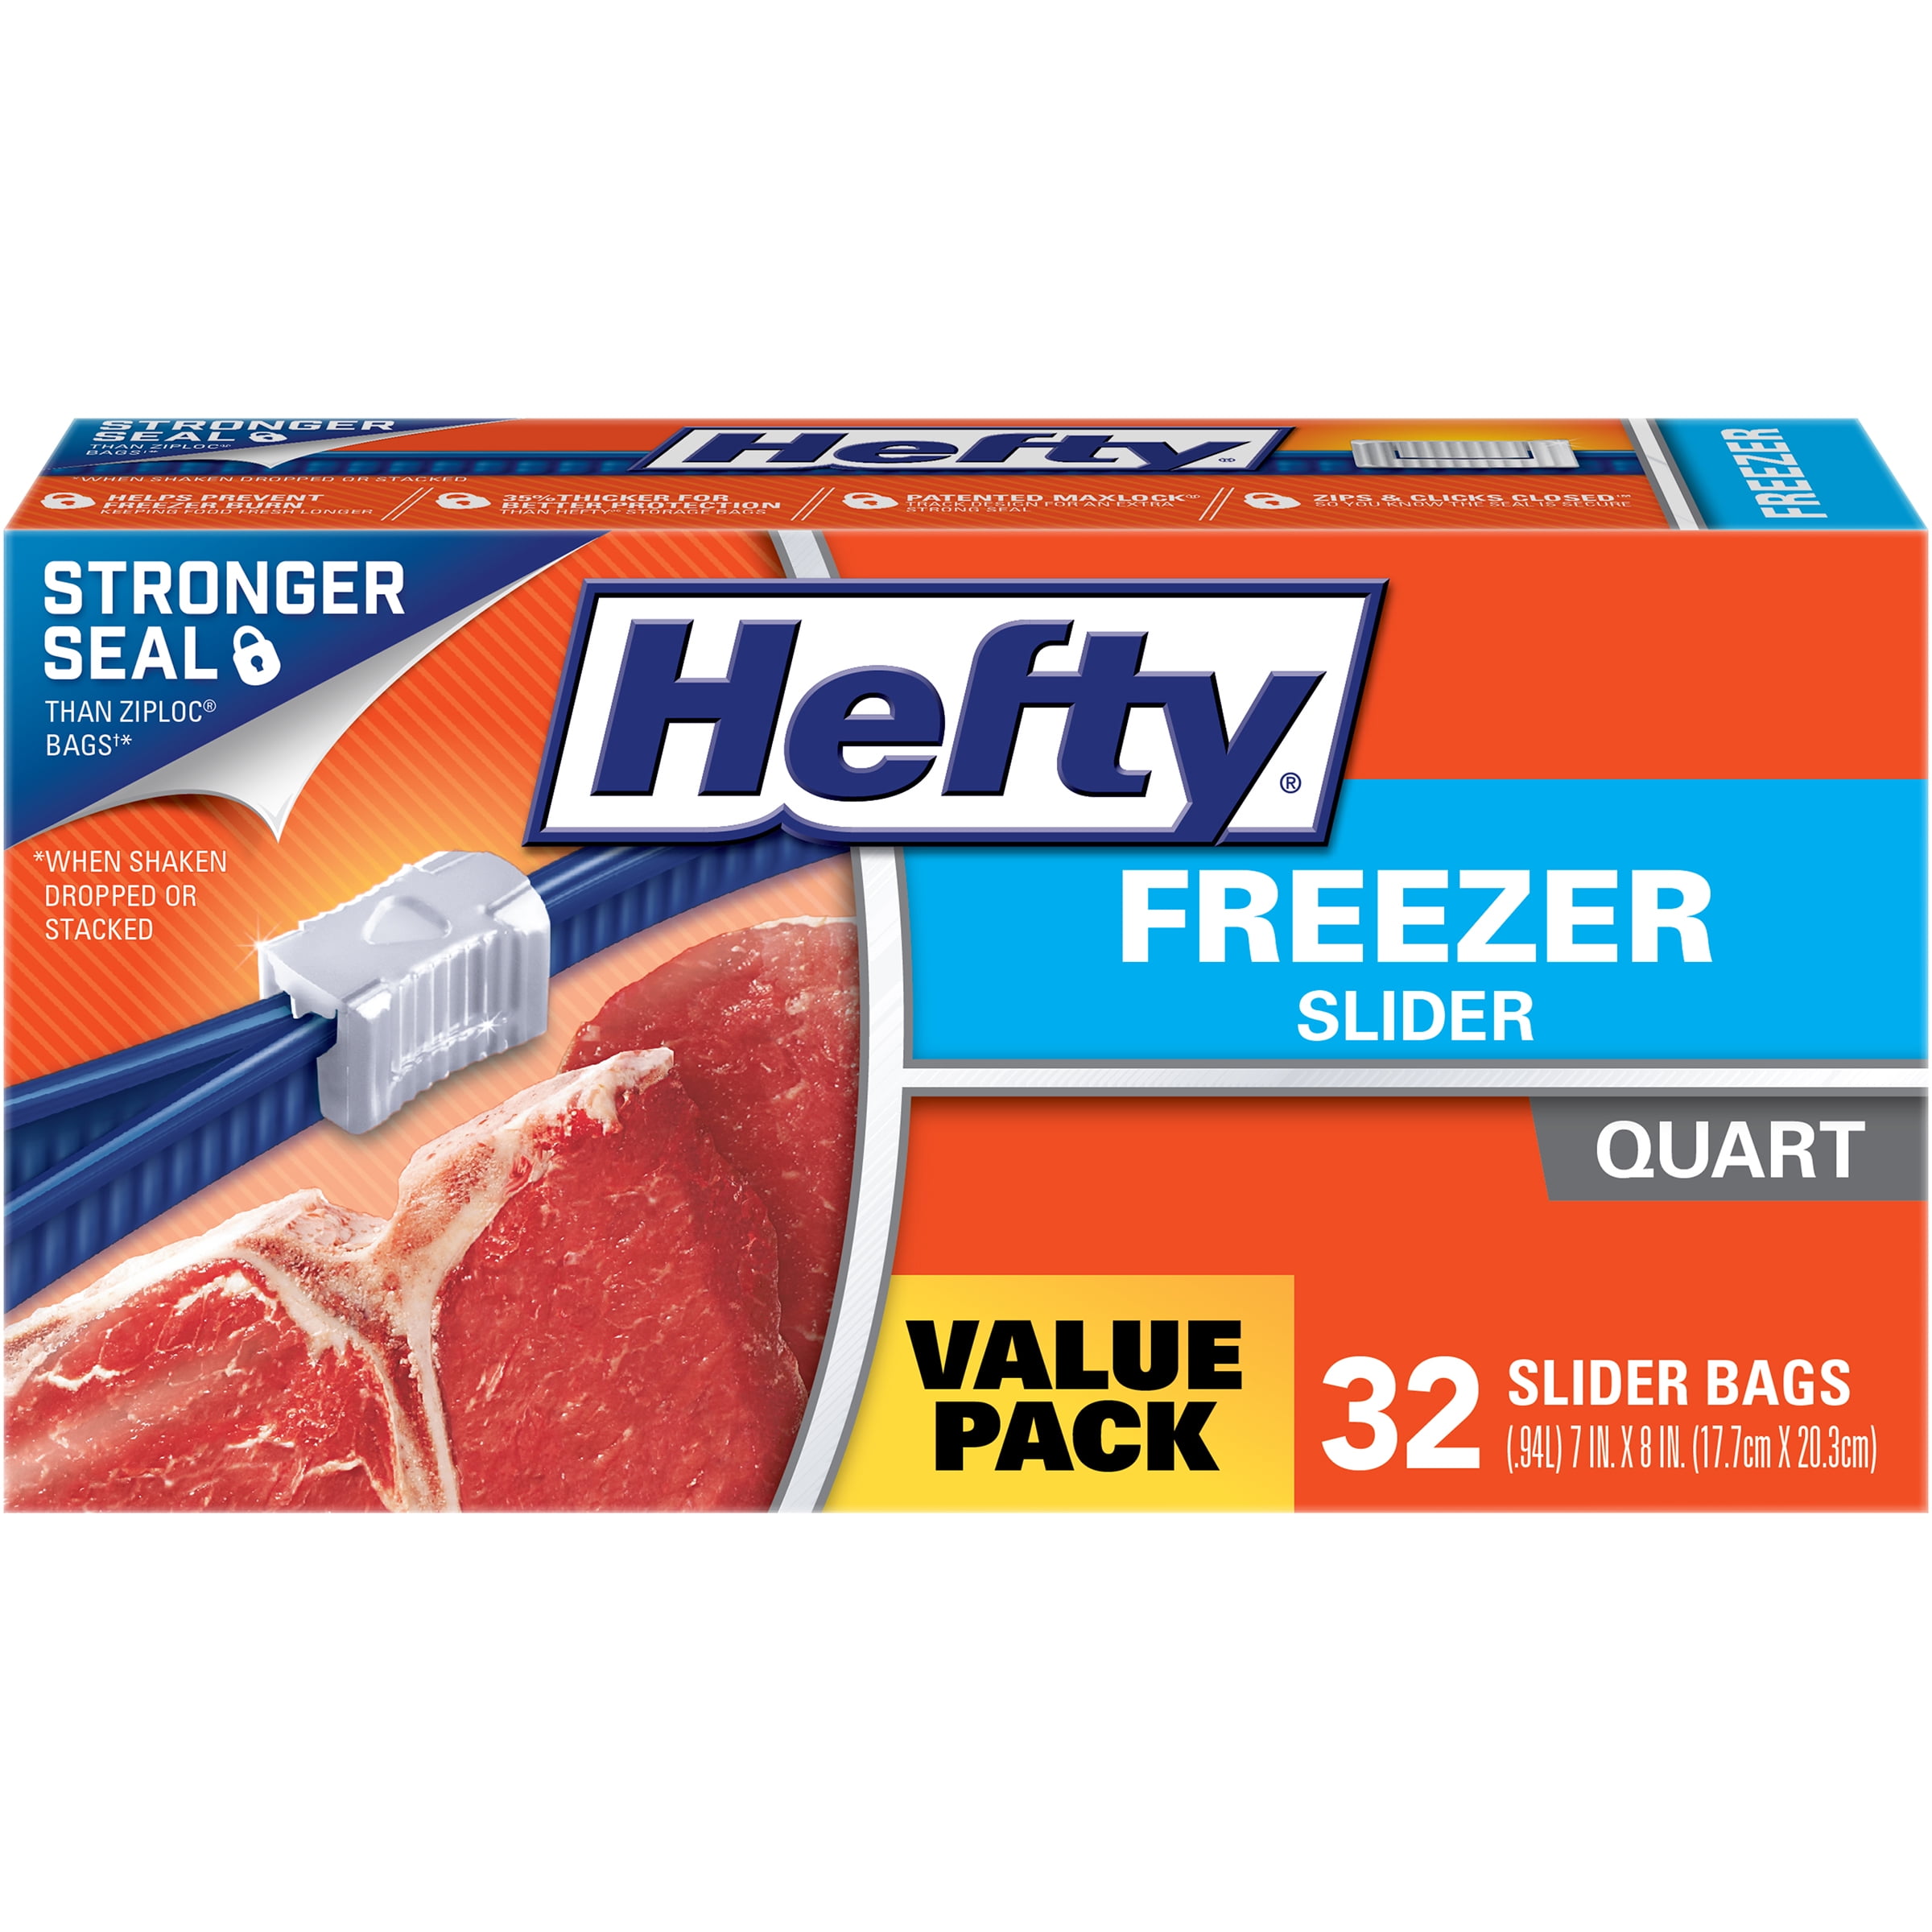 56 Count Slider Storage Bags Gallon Size Quart Size Pack of 3 and Slider Freezer Storage Bags 